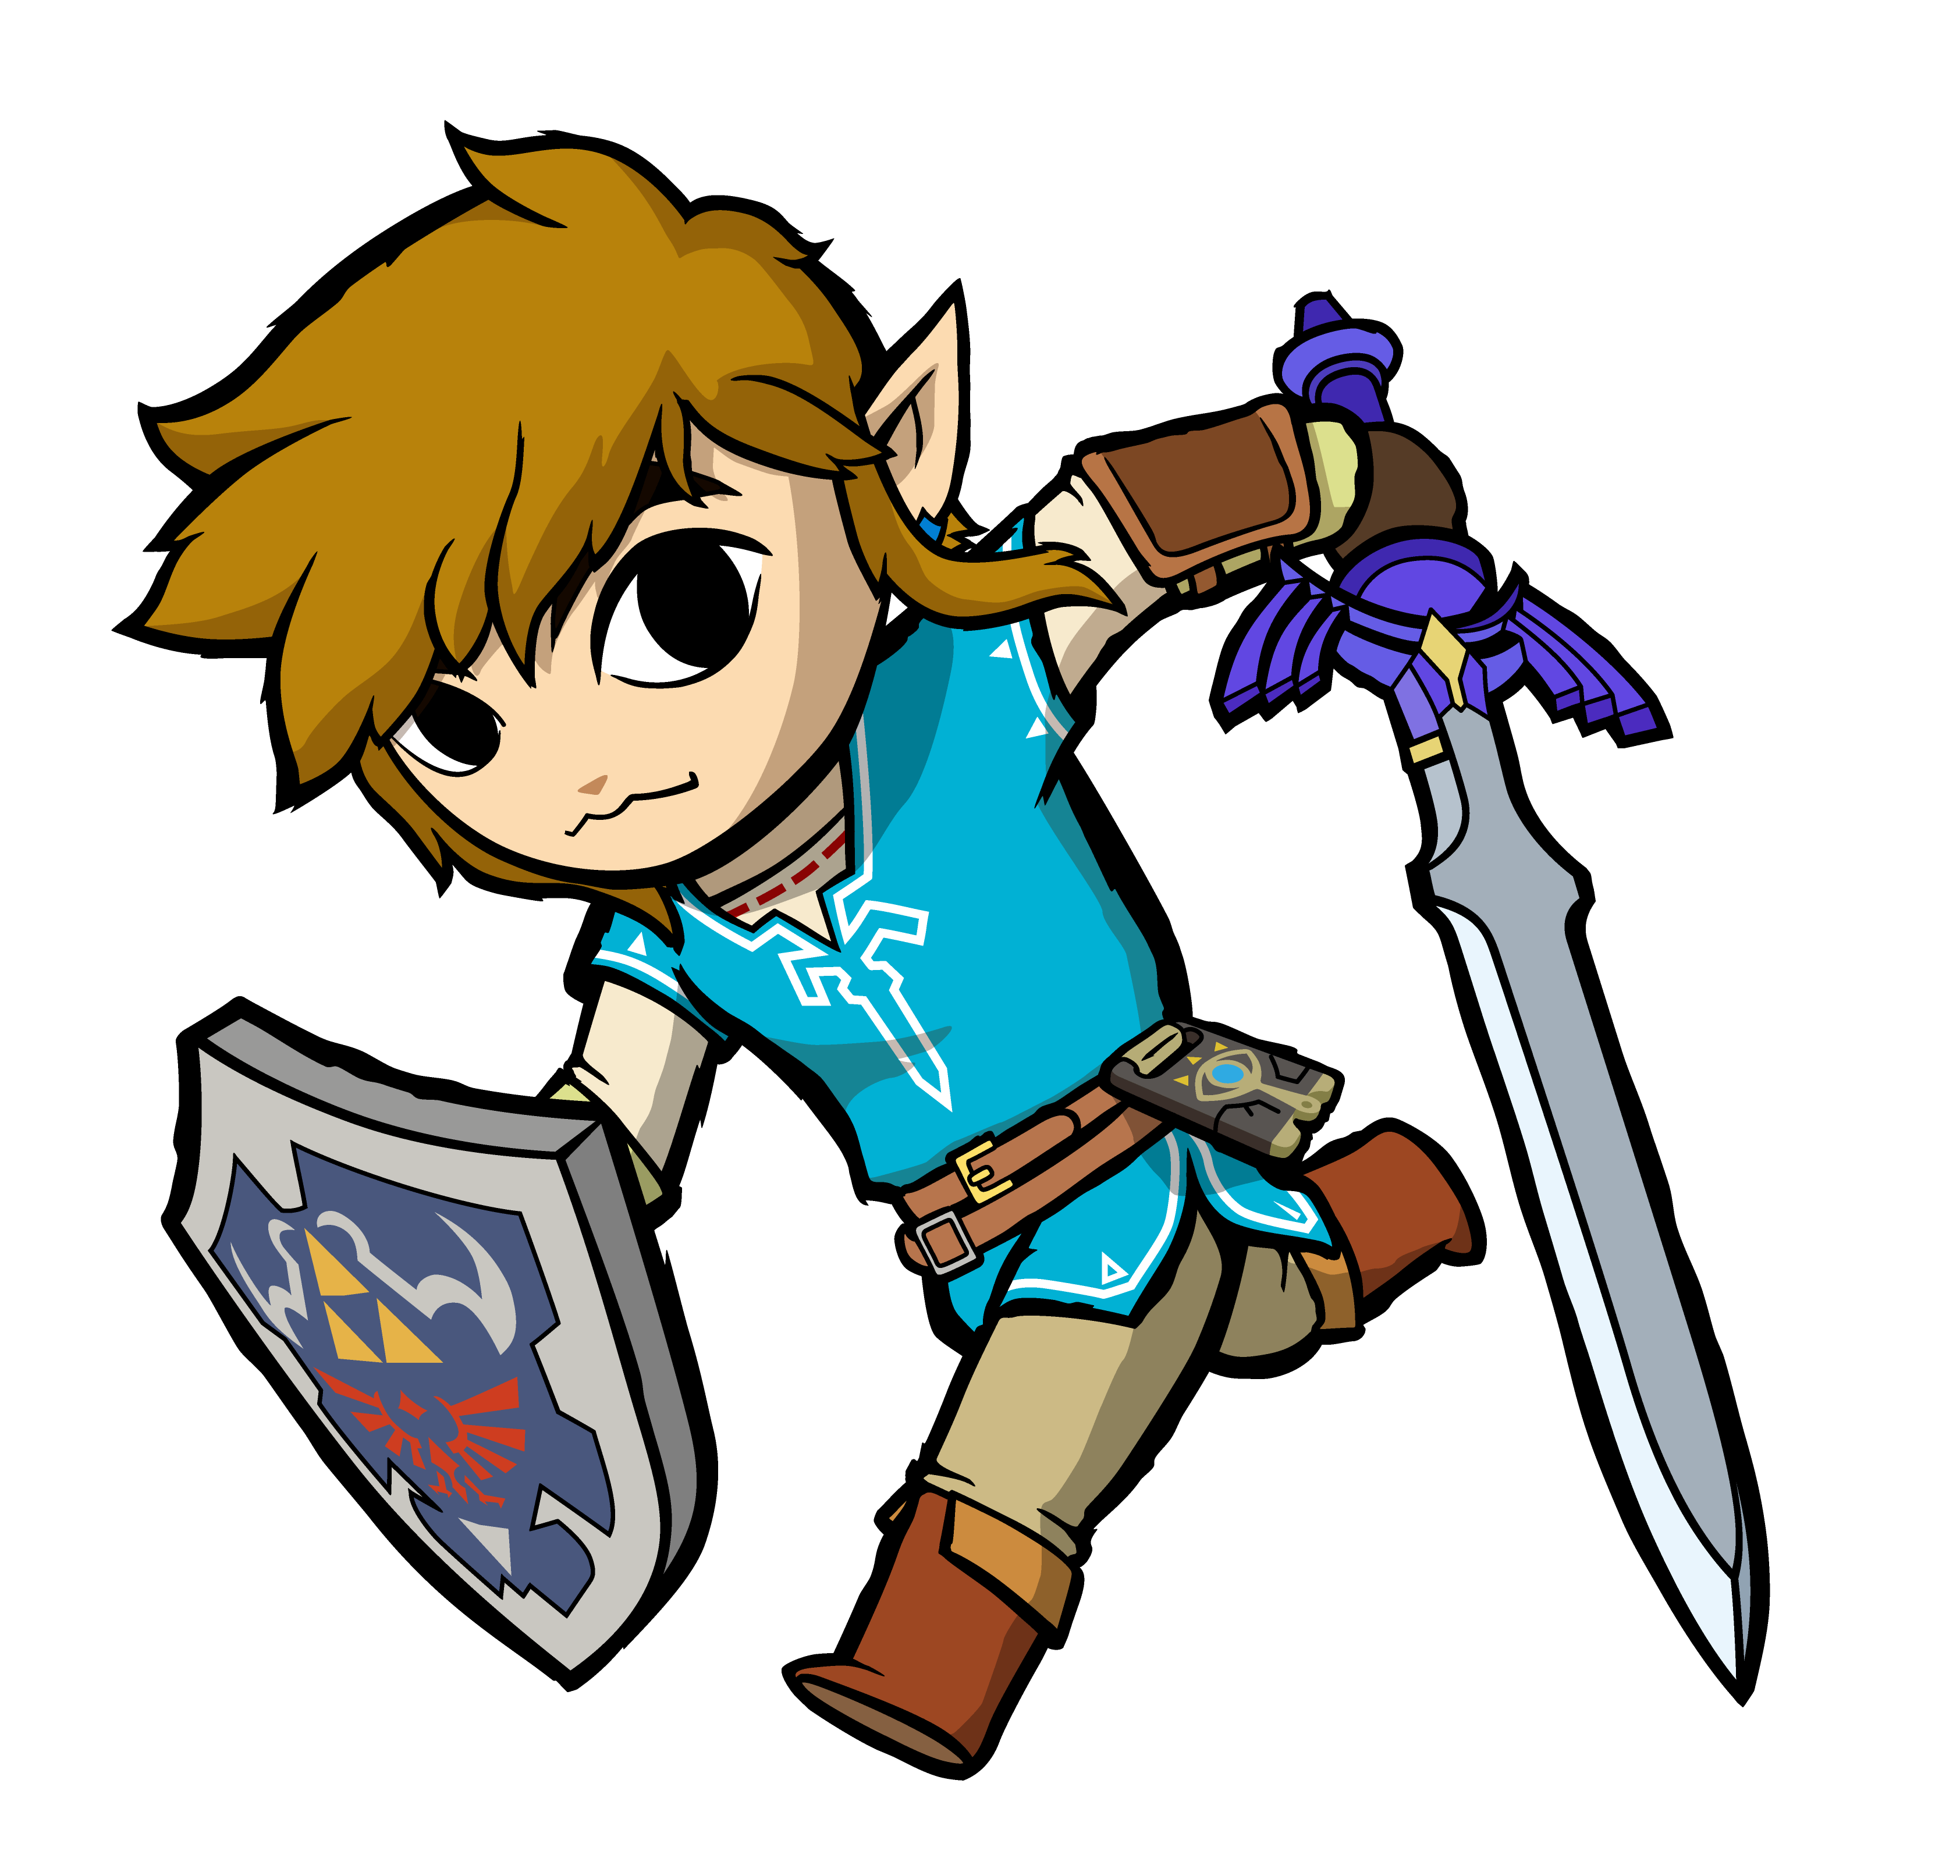 OC ART] I drew Breath of the Wild link in the toon link.